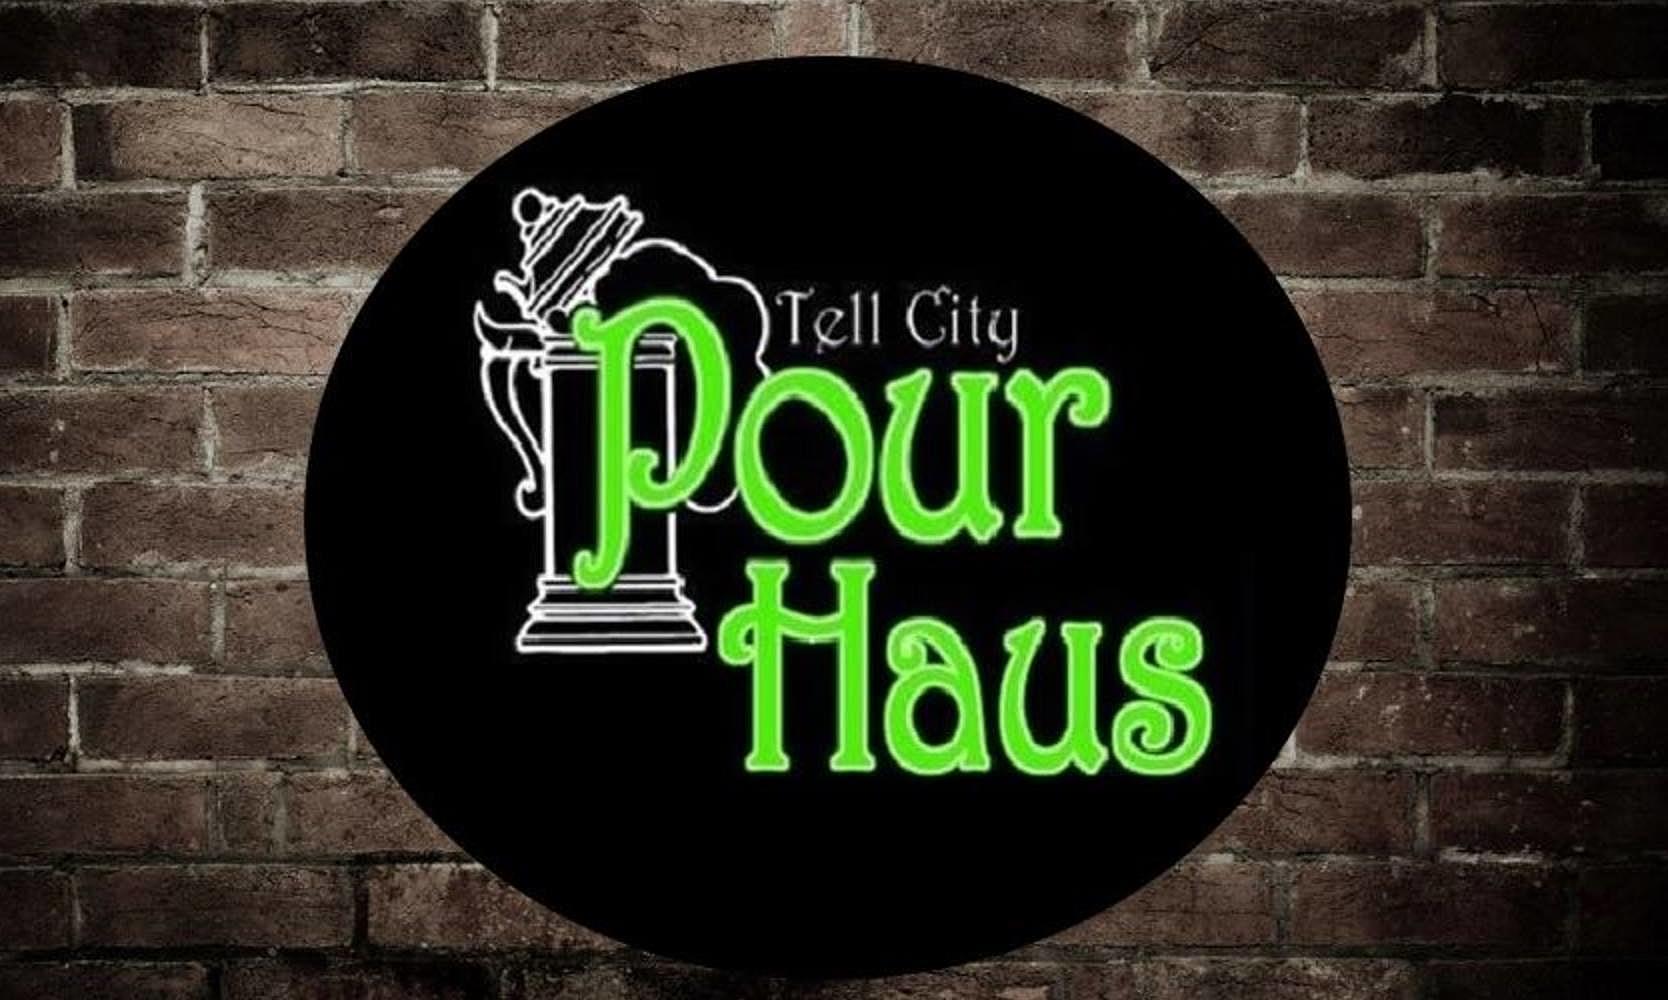 Tell City Logo - Pour Haus in Tell City Announces Outdoor Concert Series